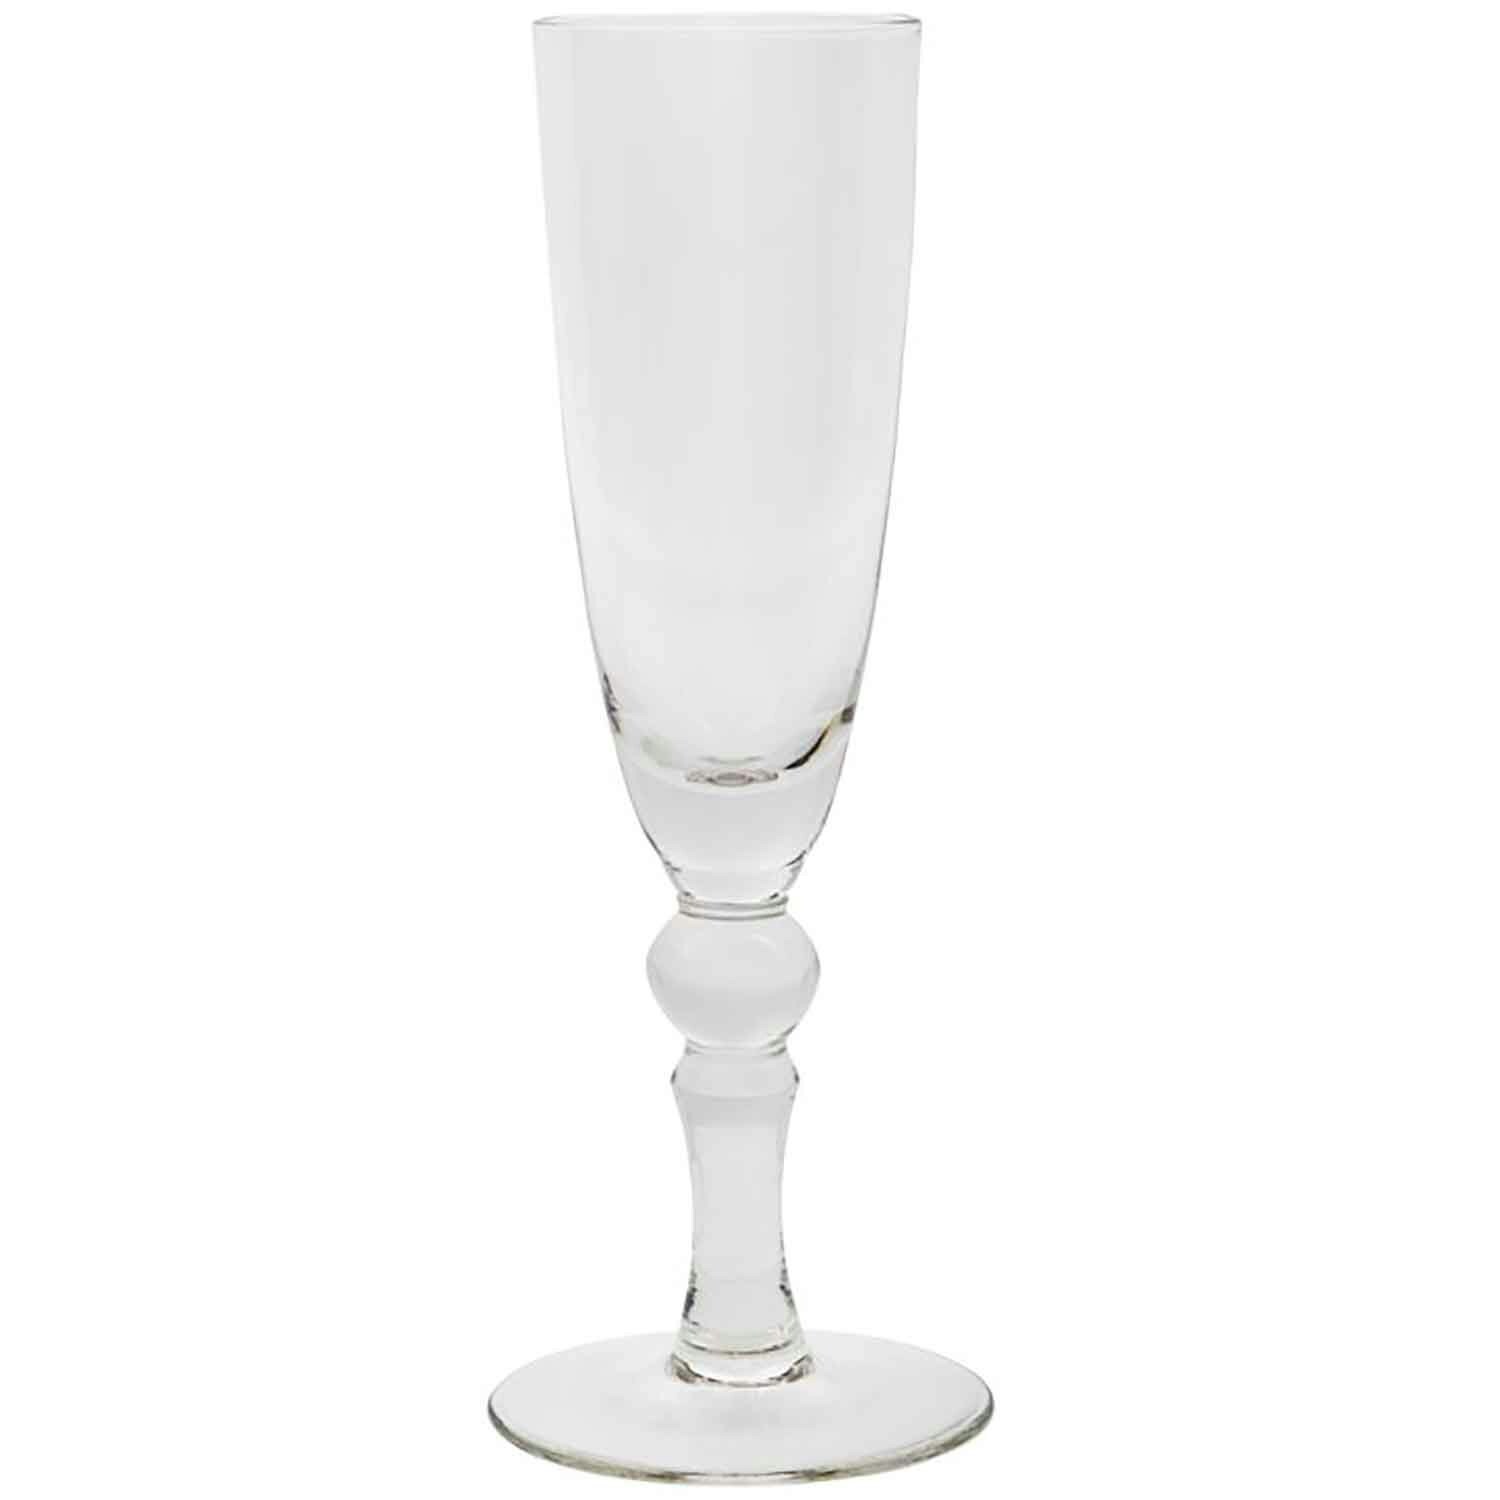 https://royaldesign.com/image/2/house-doctor-main-champagne-glass-25-cl-0